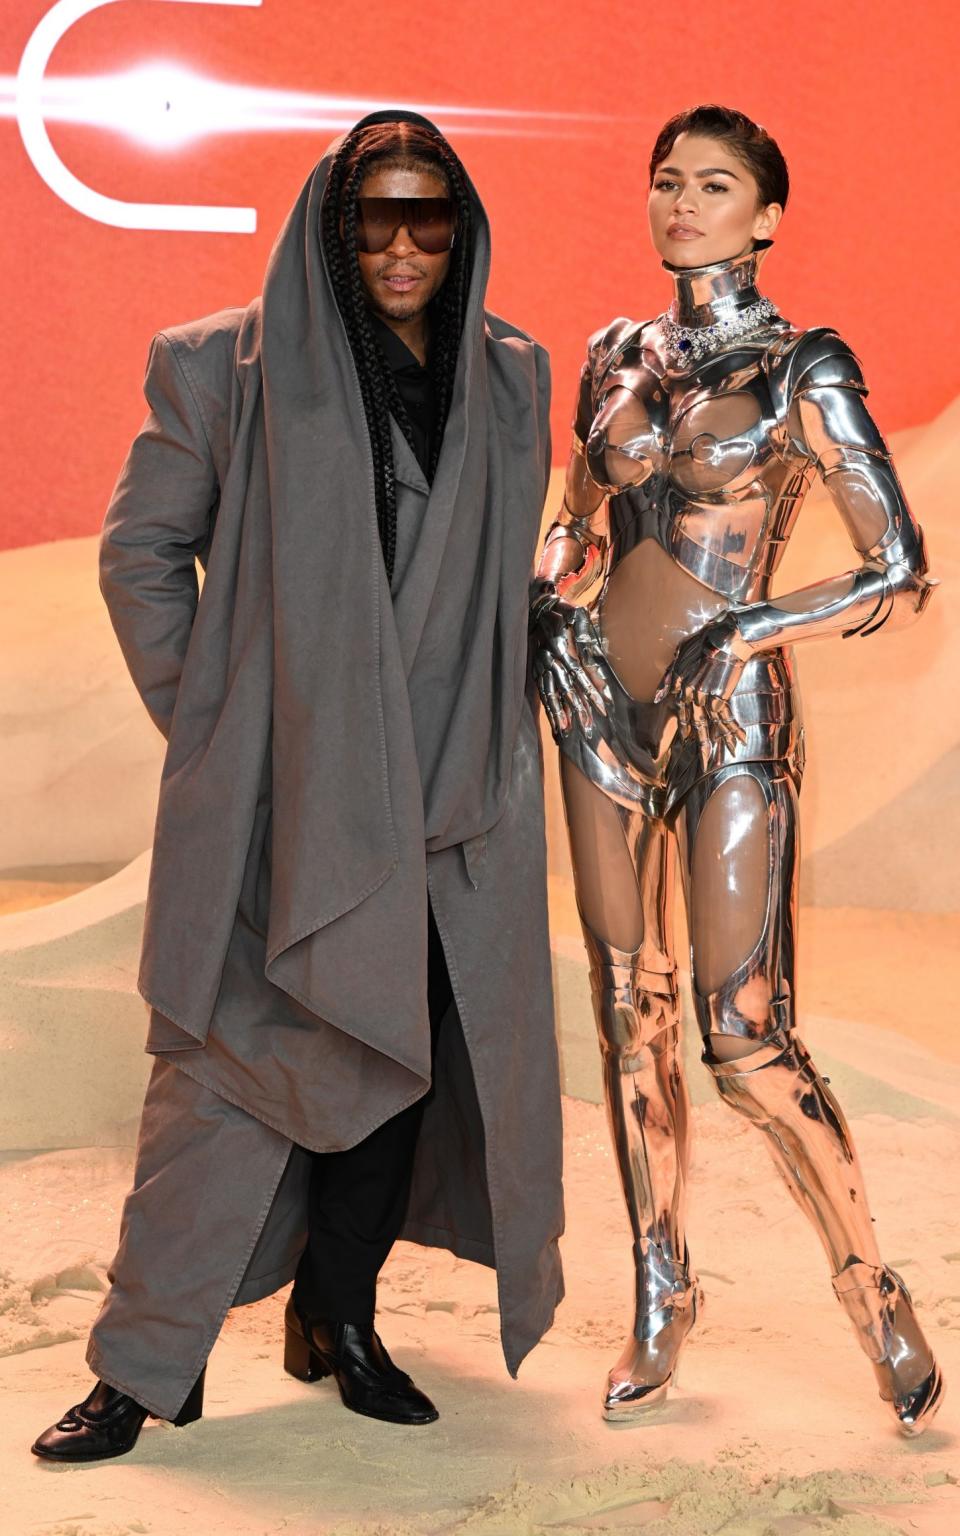 Zendaya's stylist, Law Roach, joined her on the red carpet for the film's London premiere, for which she wore a silver Thierry Mugler robot suit.